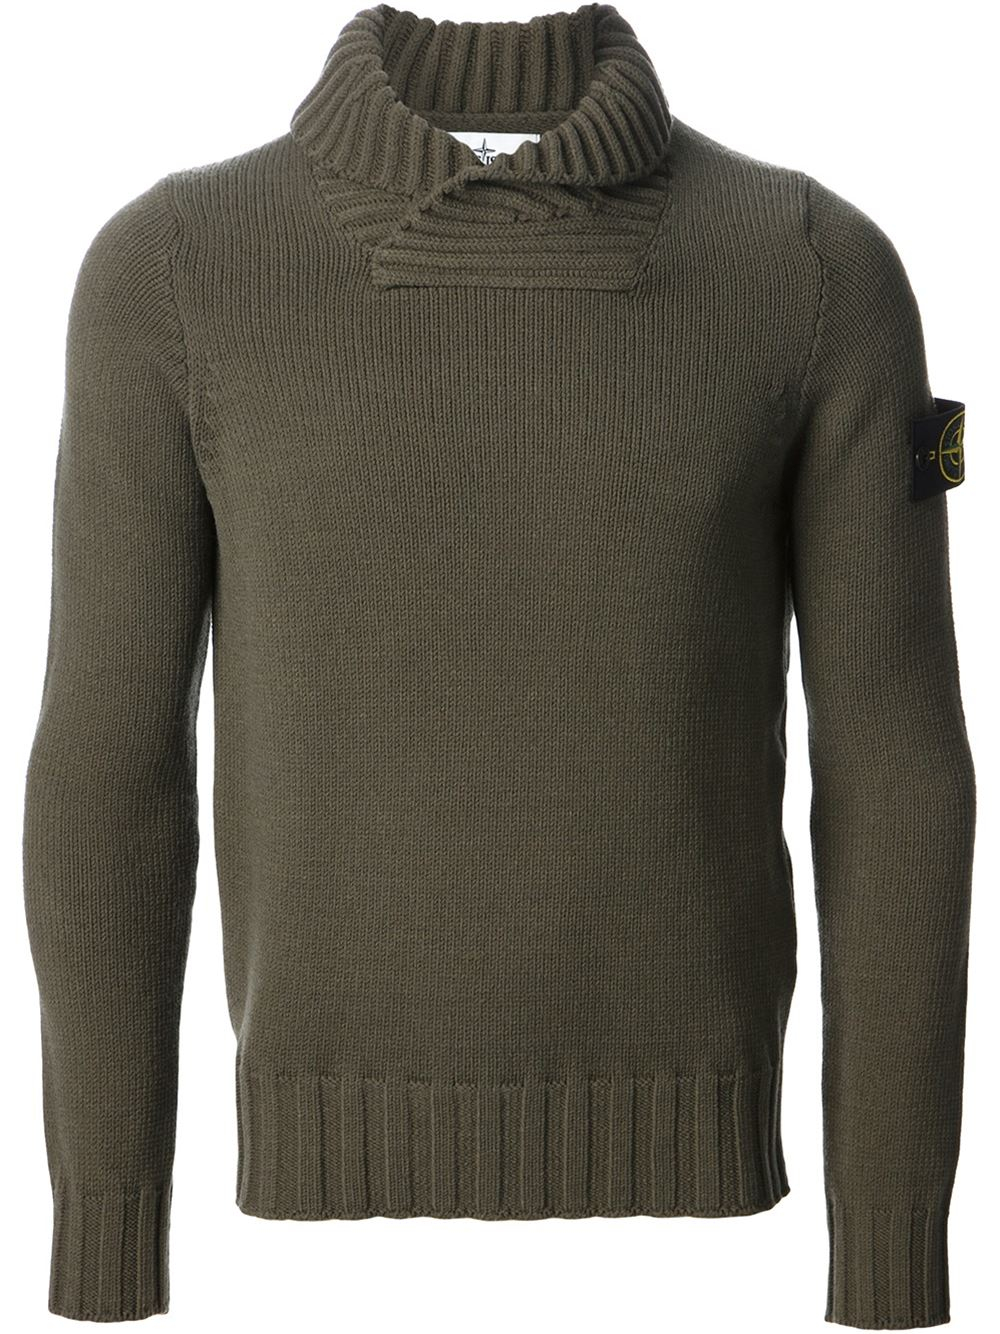 Lyst - Stone Island Roll Neck Sweater in Green for Men